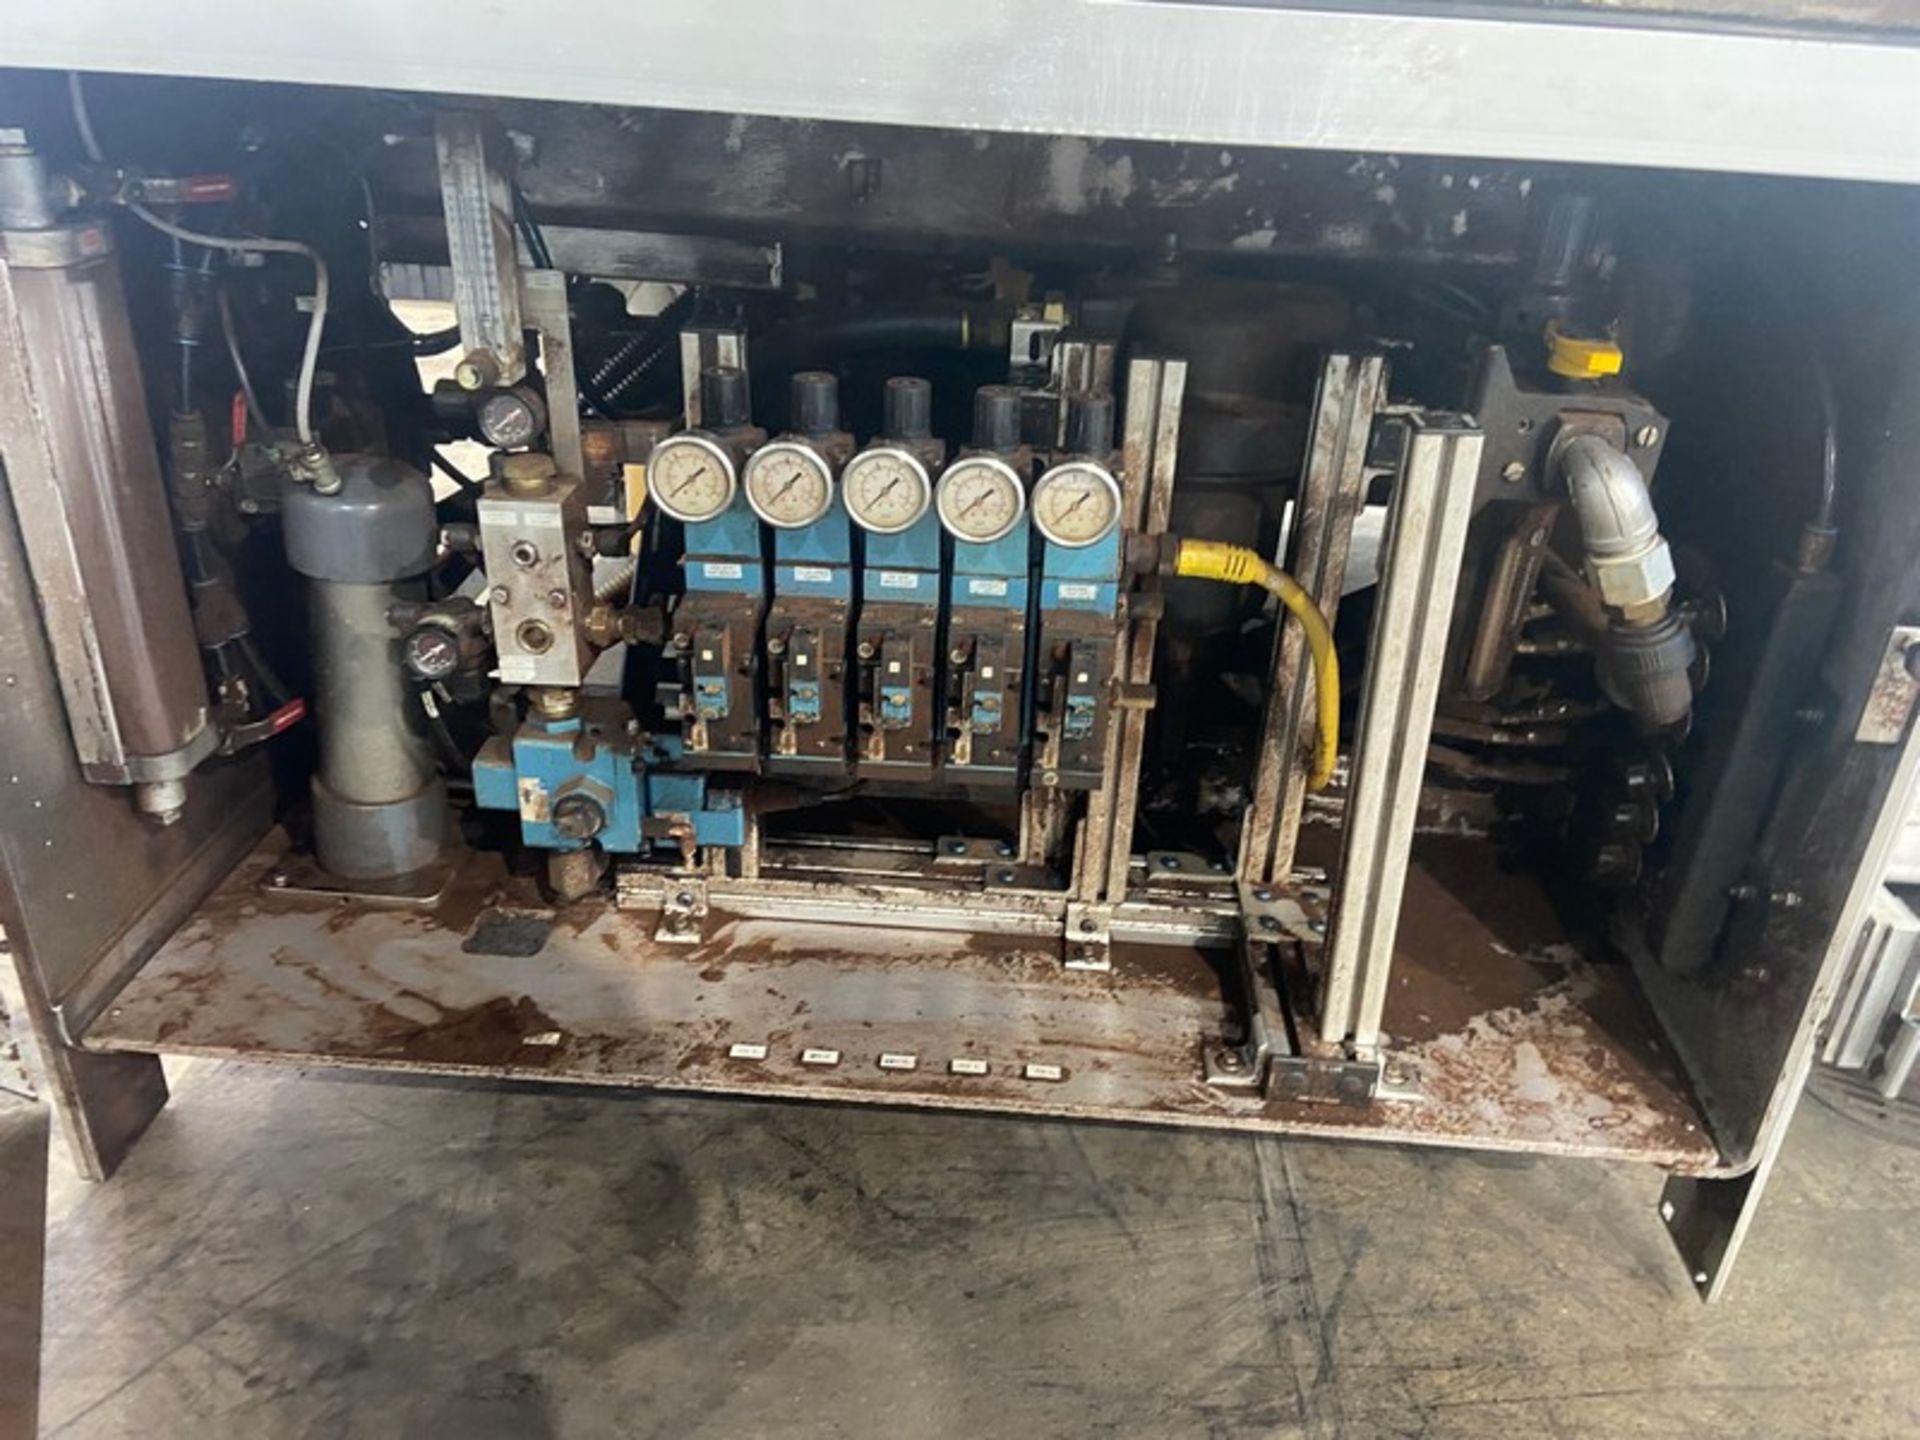 R.A. Jones Pouch King Pouch Filler, M/N S-6042, S/N S-6042, 460 Volts, 3 Phase, with On Board - Image 13 of 20